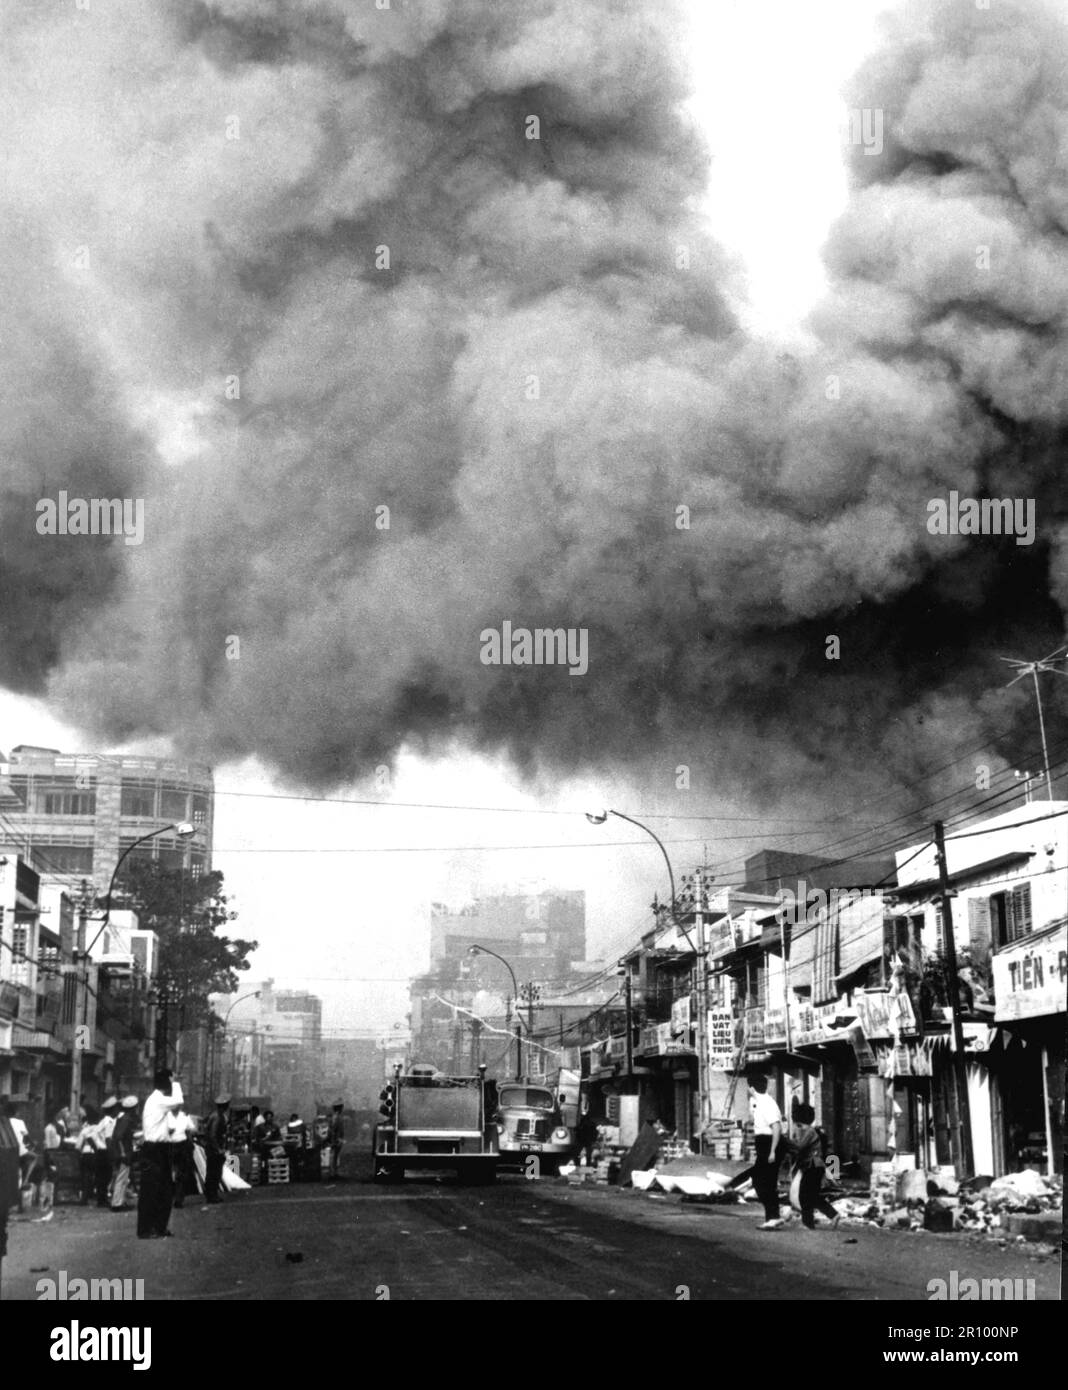 Black smoke covers areas of Saigon as fire trucks rush to the scenes of fires set during attacks by the Viet Cong during the Tet holiday period.  Circa 1968. Stock Photo